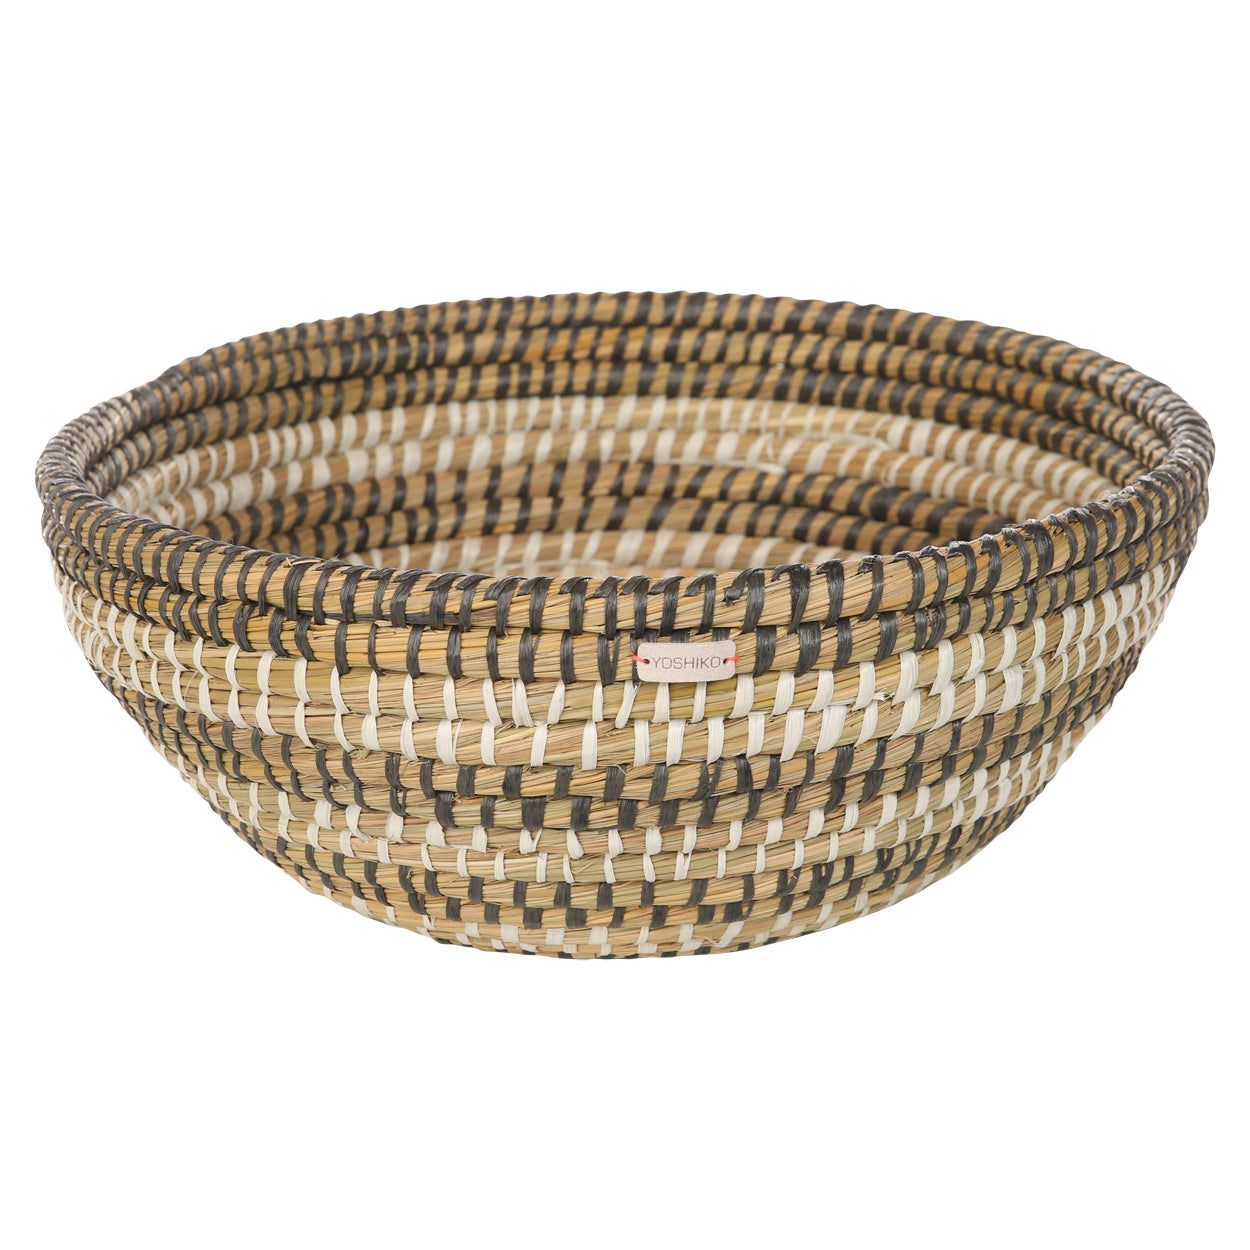 Black and White patterned Seagrass Basket/Bowl Large